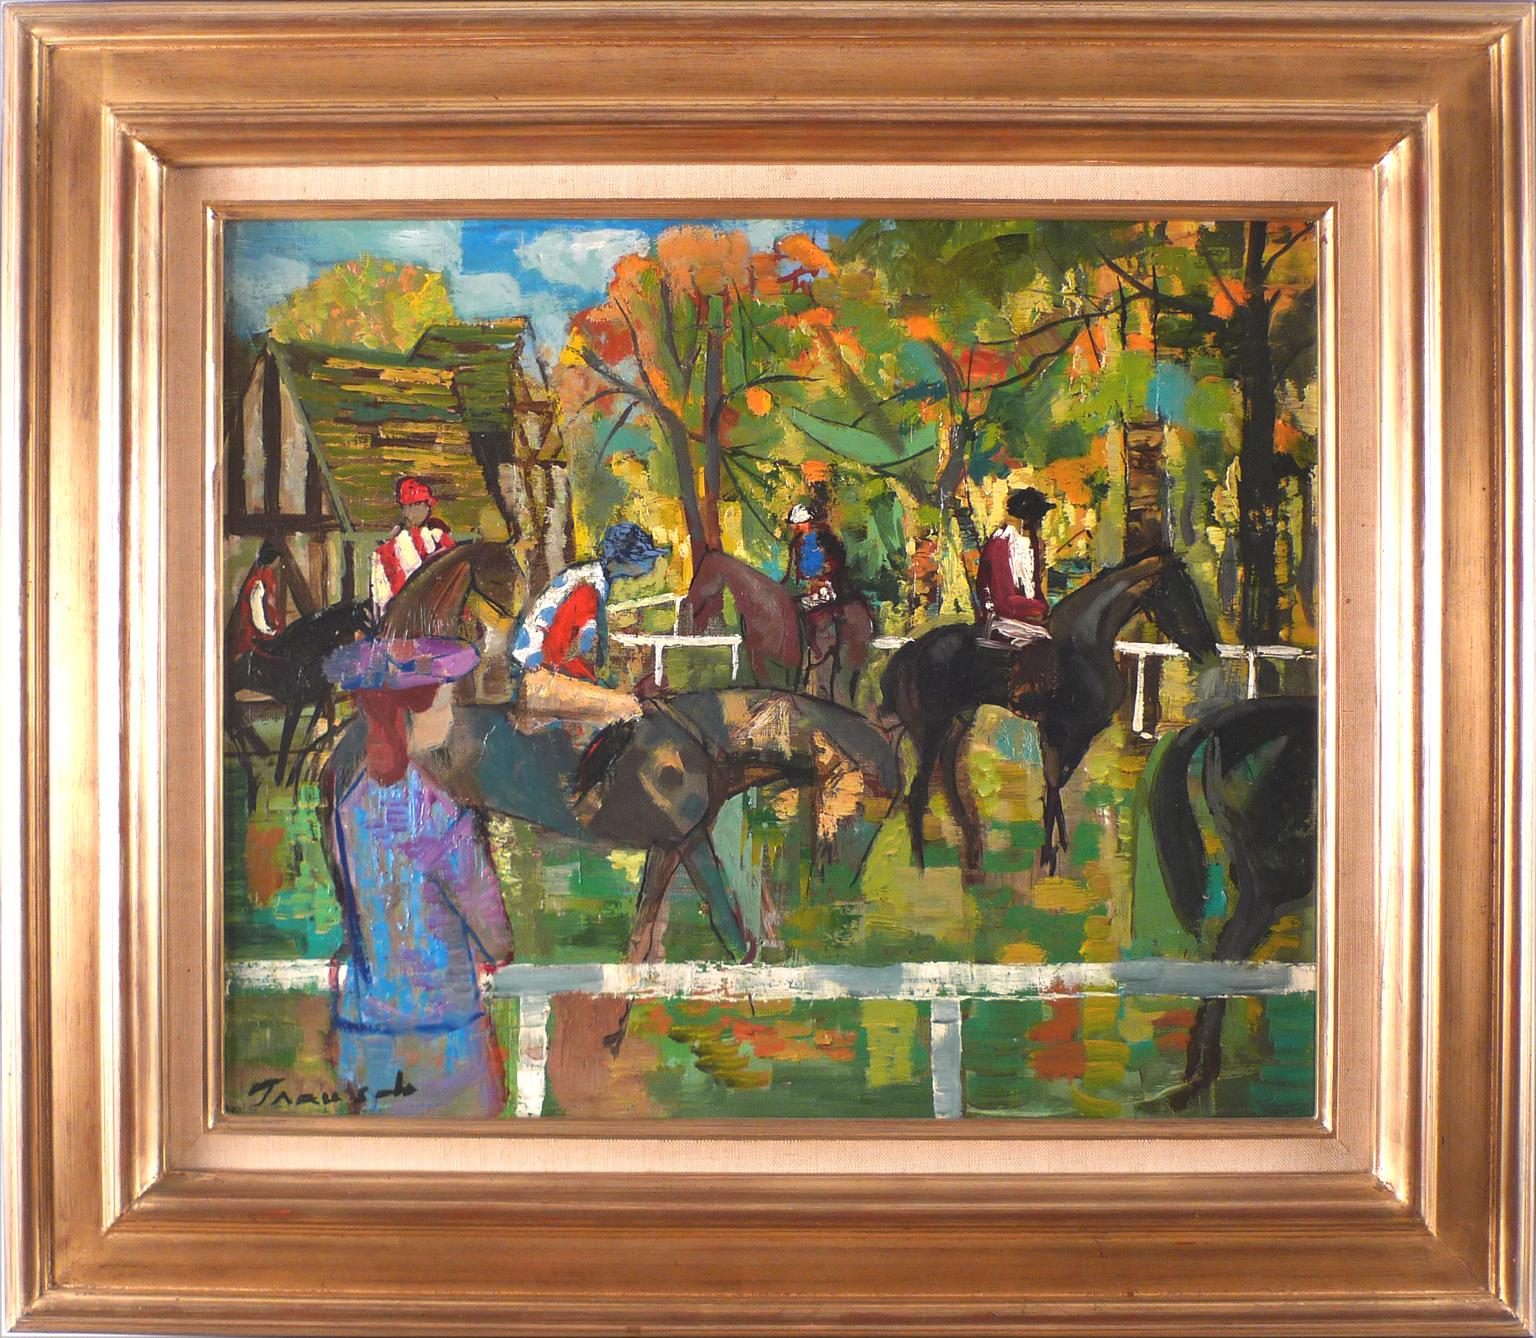 EMILIO GRAU SALA
Spanish, 1911 - 1975
DEAUVILLE, 1963
signed "Grau Sala" (lower left)
signed again, titled & dated "GRAU SALA / Deauville / 1963" (on the reverse)
oil on canvas
15 x 18-1/8 inches (38 x 46 cm.)
framed: 21-3/4 x 25 inches (55 x 63